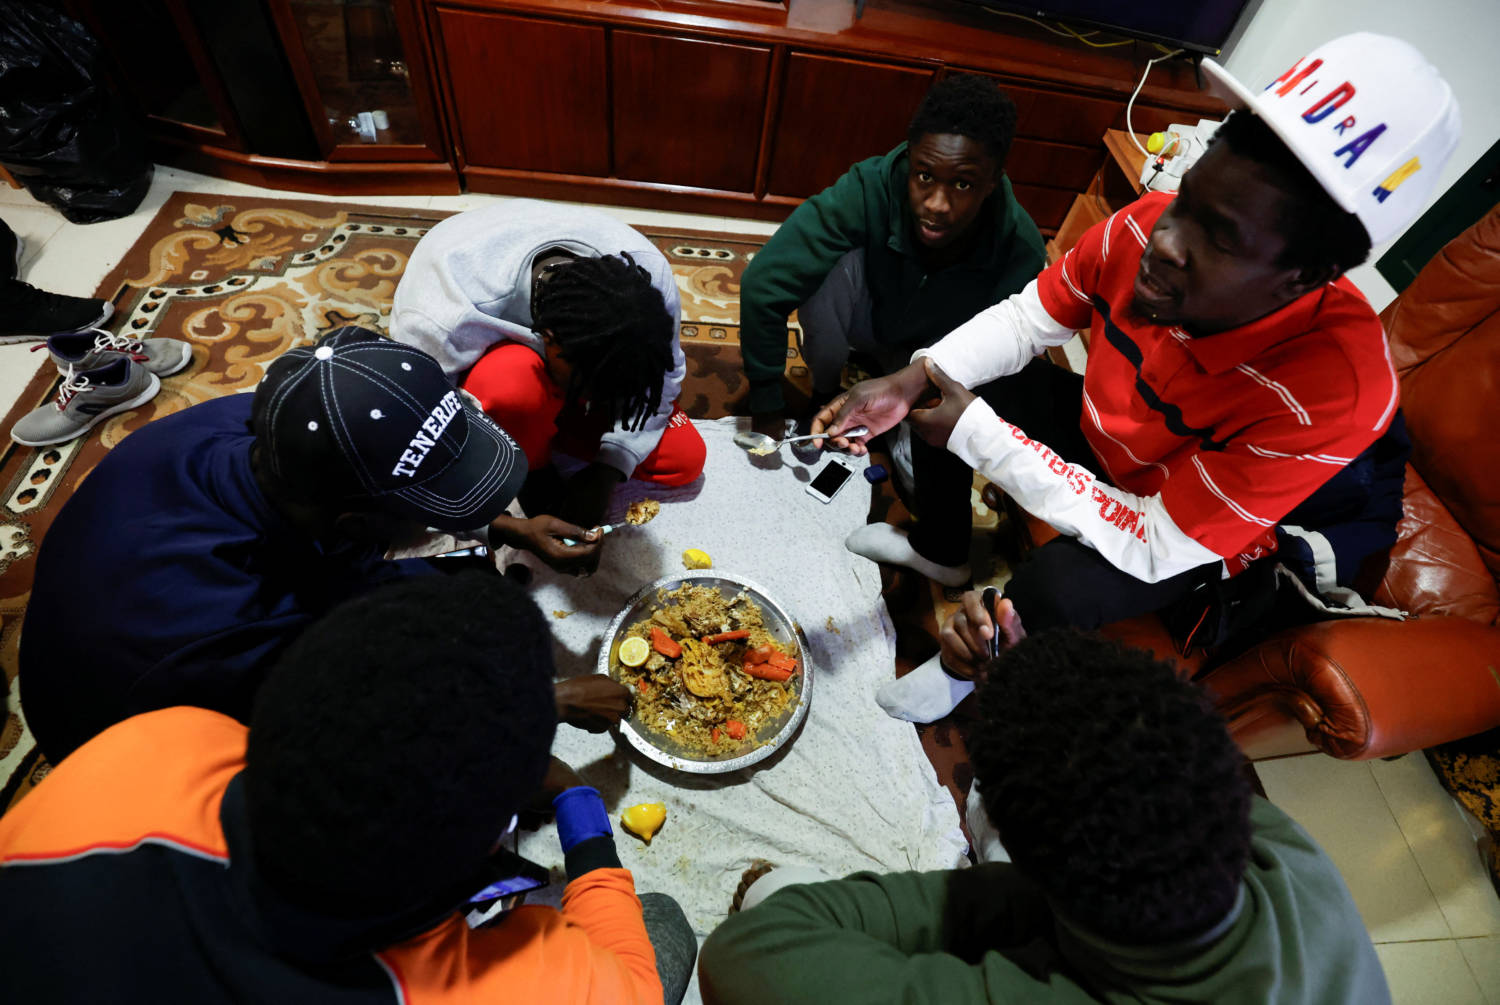 Former Senegalese Fishermen Khalifa Ndou And Momar Pouye Ngom Have Dinner Together With Companions